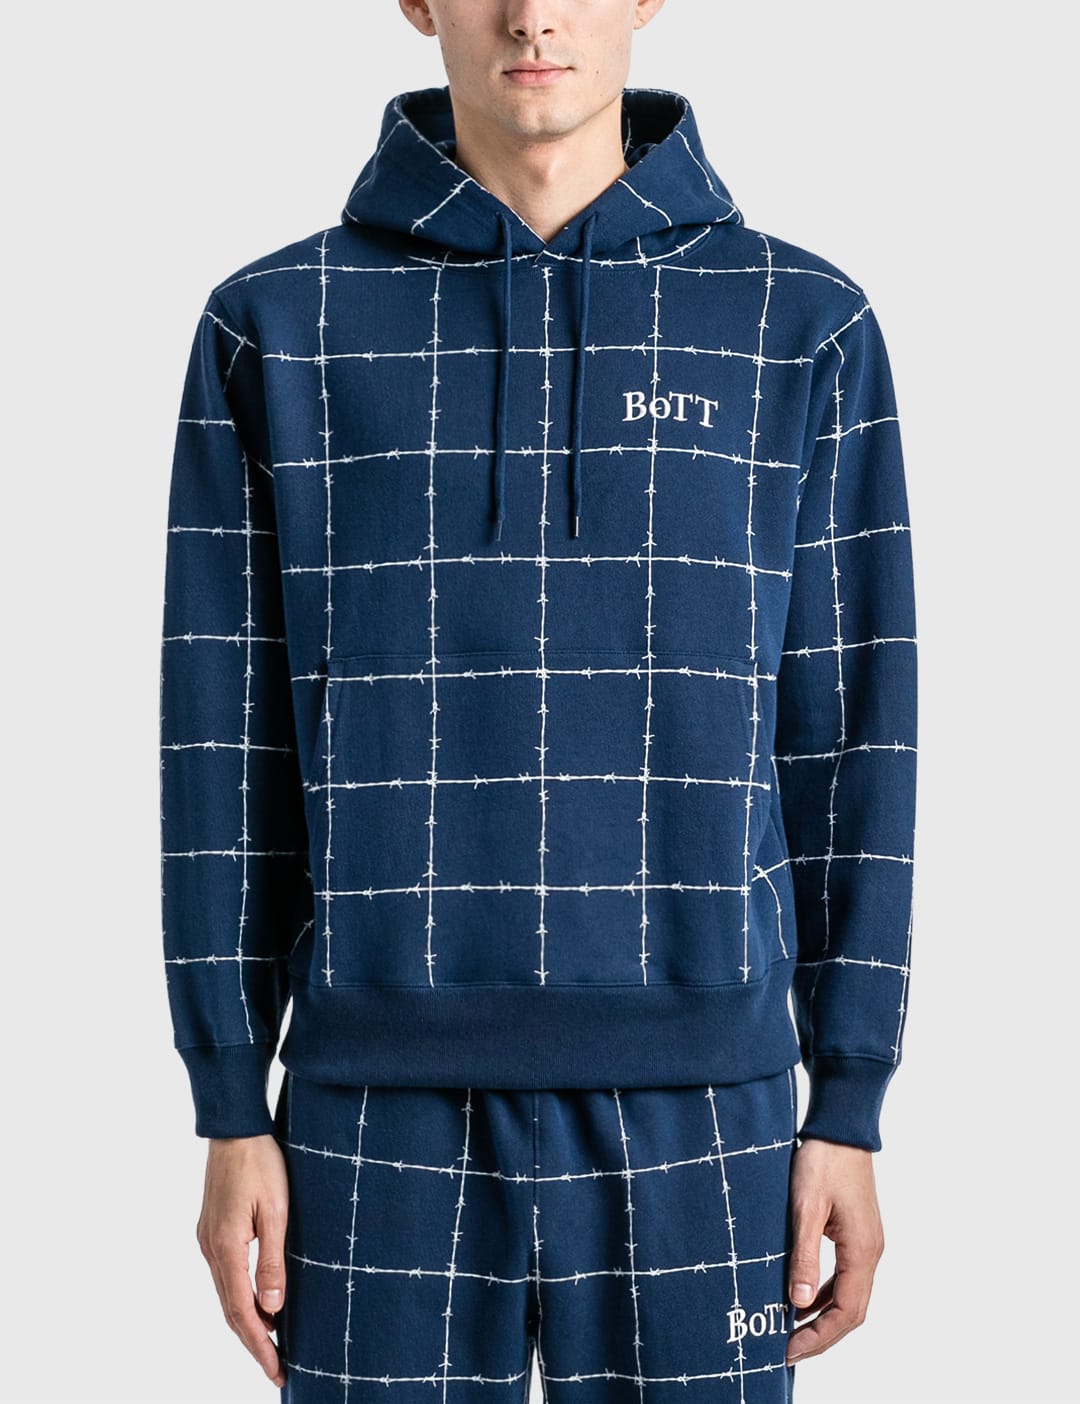 BoTT - Barbwire Pullover Hoodie | HBX - Globally Curated Fashion 